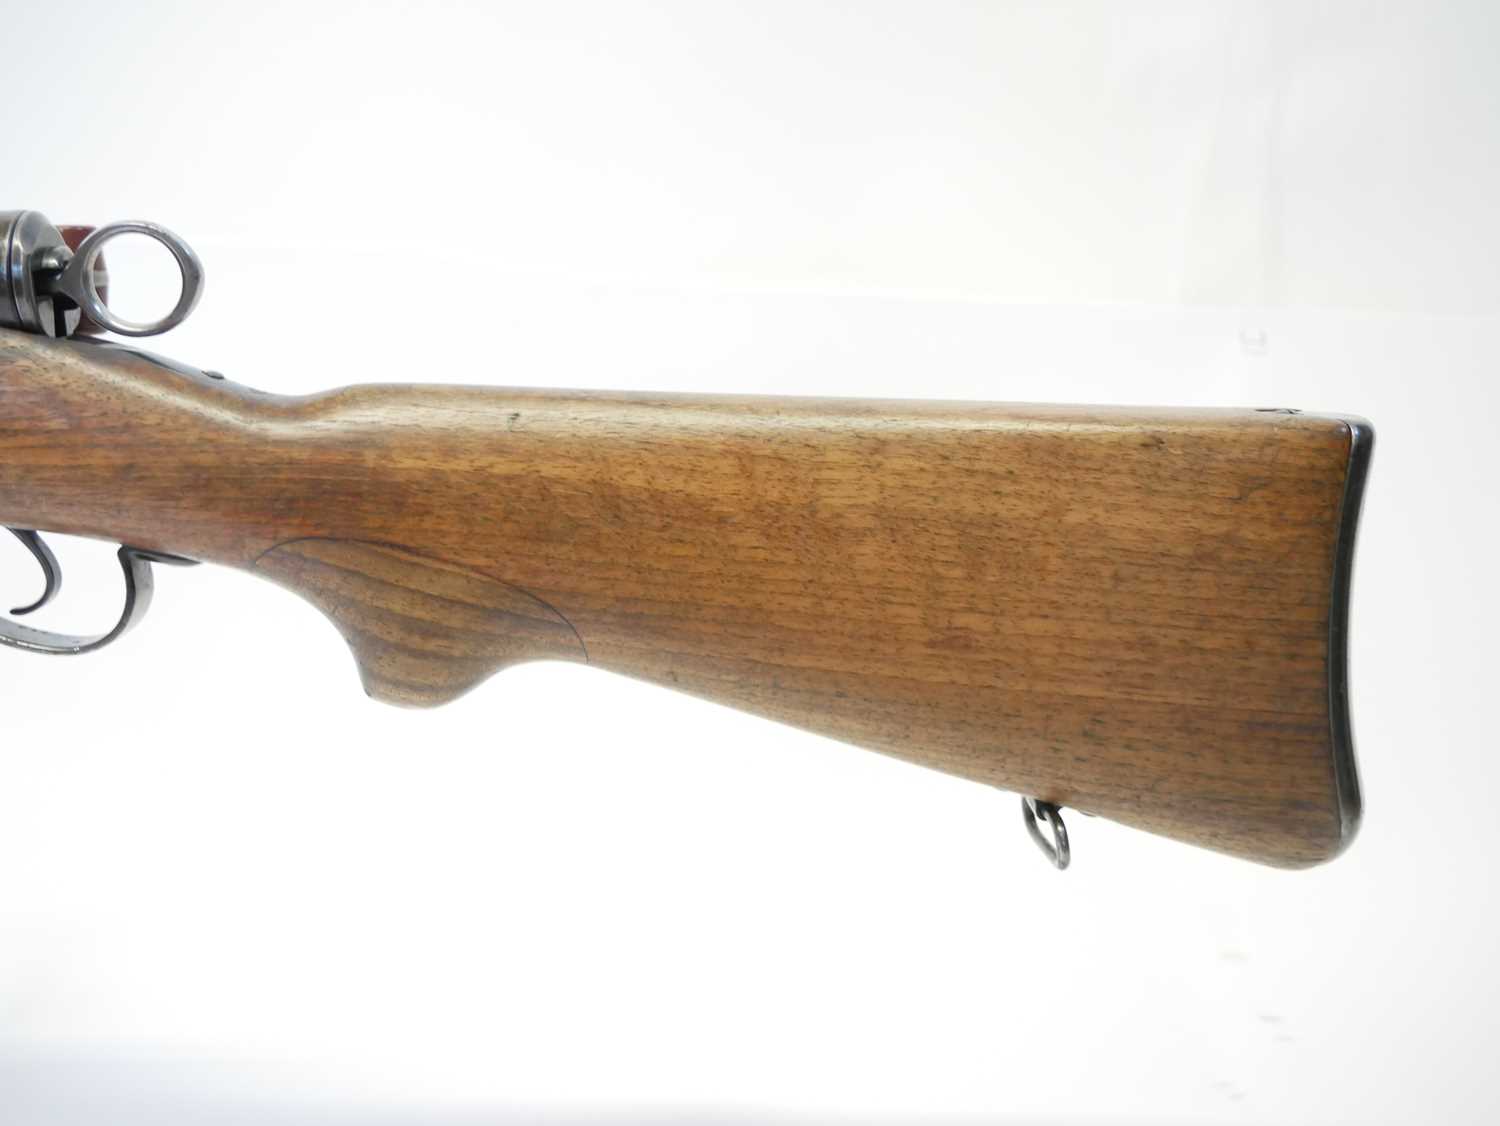 Schmidt Rubin 1896 7.5mm straight pull rifle, matching serial numbers 268510 to barrel, receiver, - Image 14 of 15